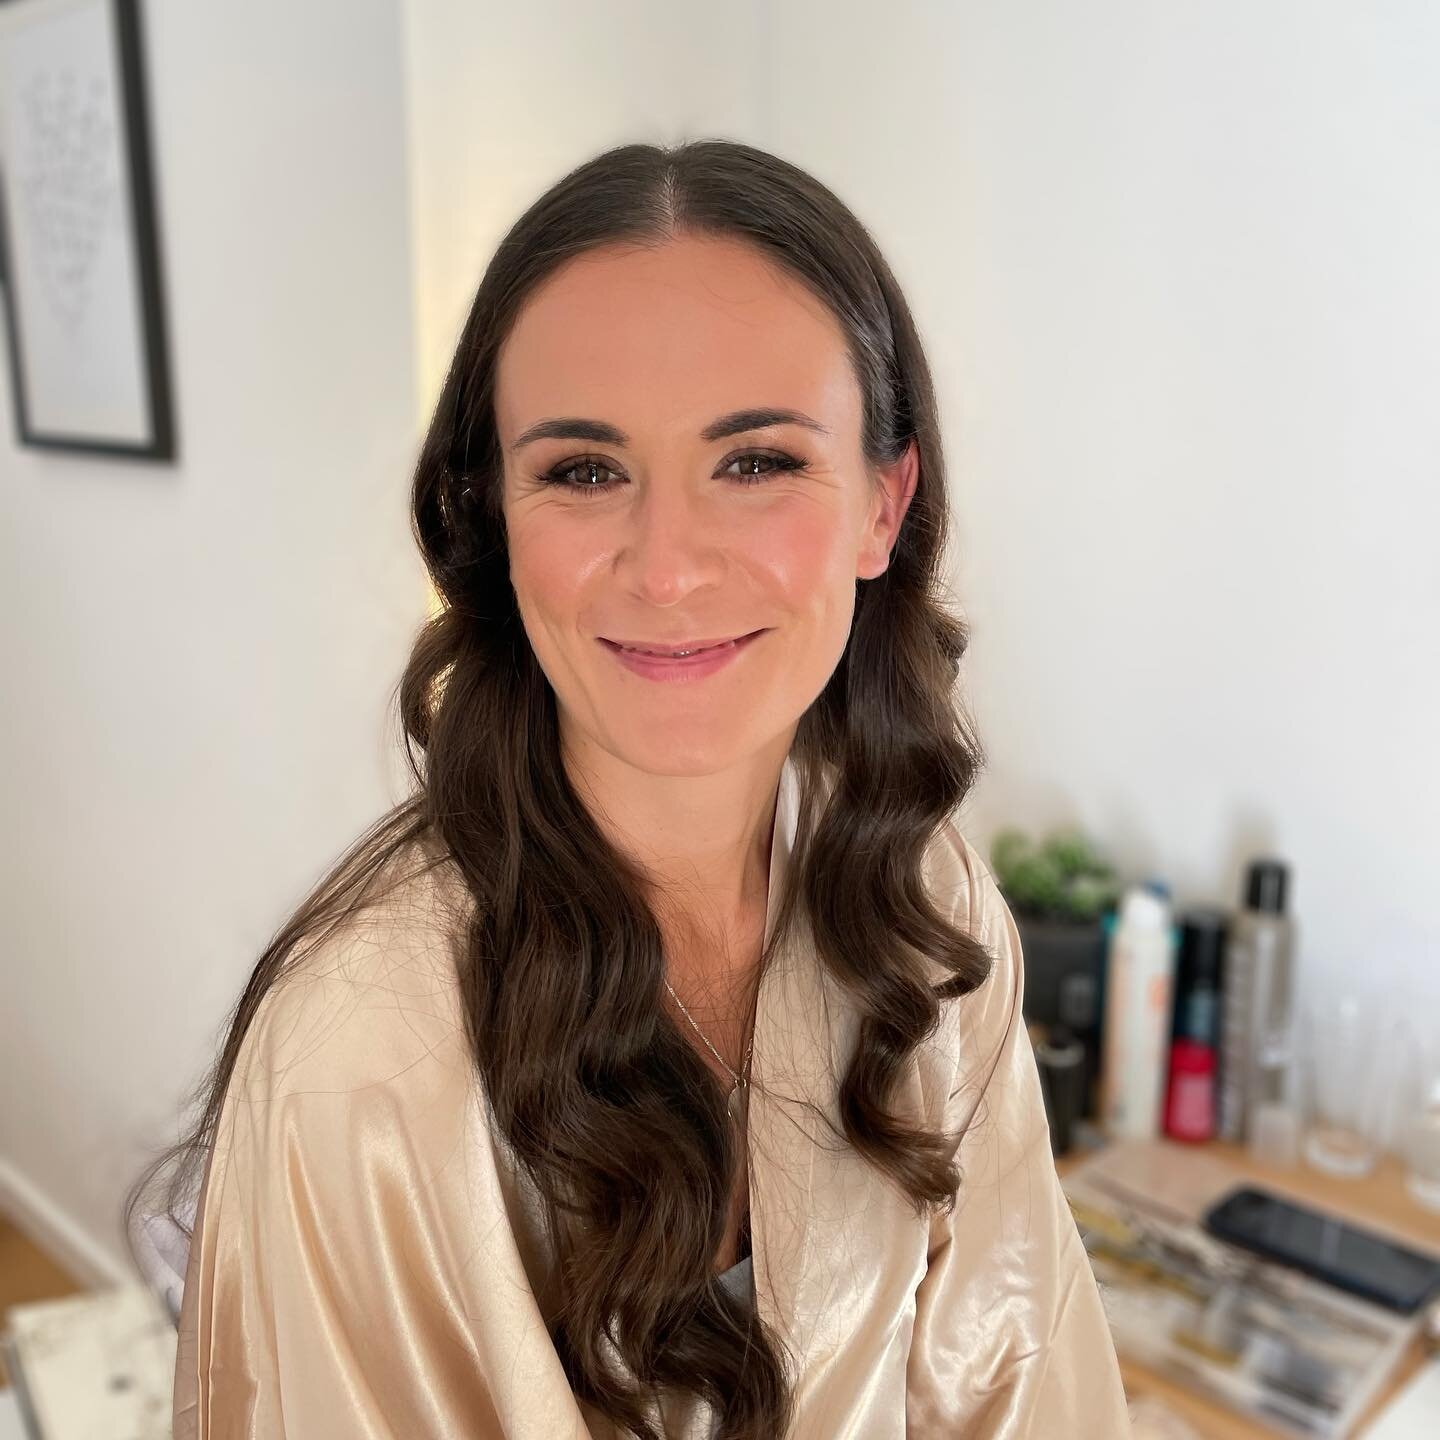 Before &amp; After - A sneak peek of my beautiful Devon bride Manon. What a dreamy weekend words cannot describe! Can&rsquo;t wait to show you more. 🤍 #naturalglowmakeup #summerbronze
.
.
.
#styledbycarolinatorstensson #mallorcawedding #mallorcaprop